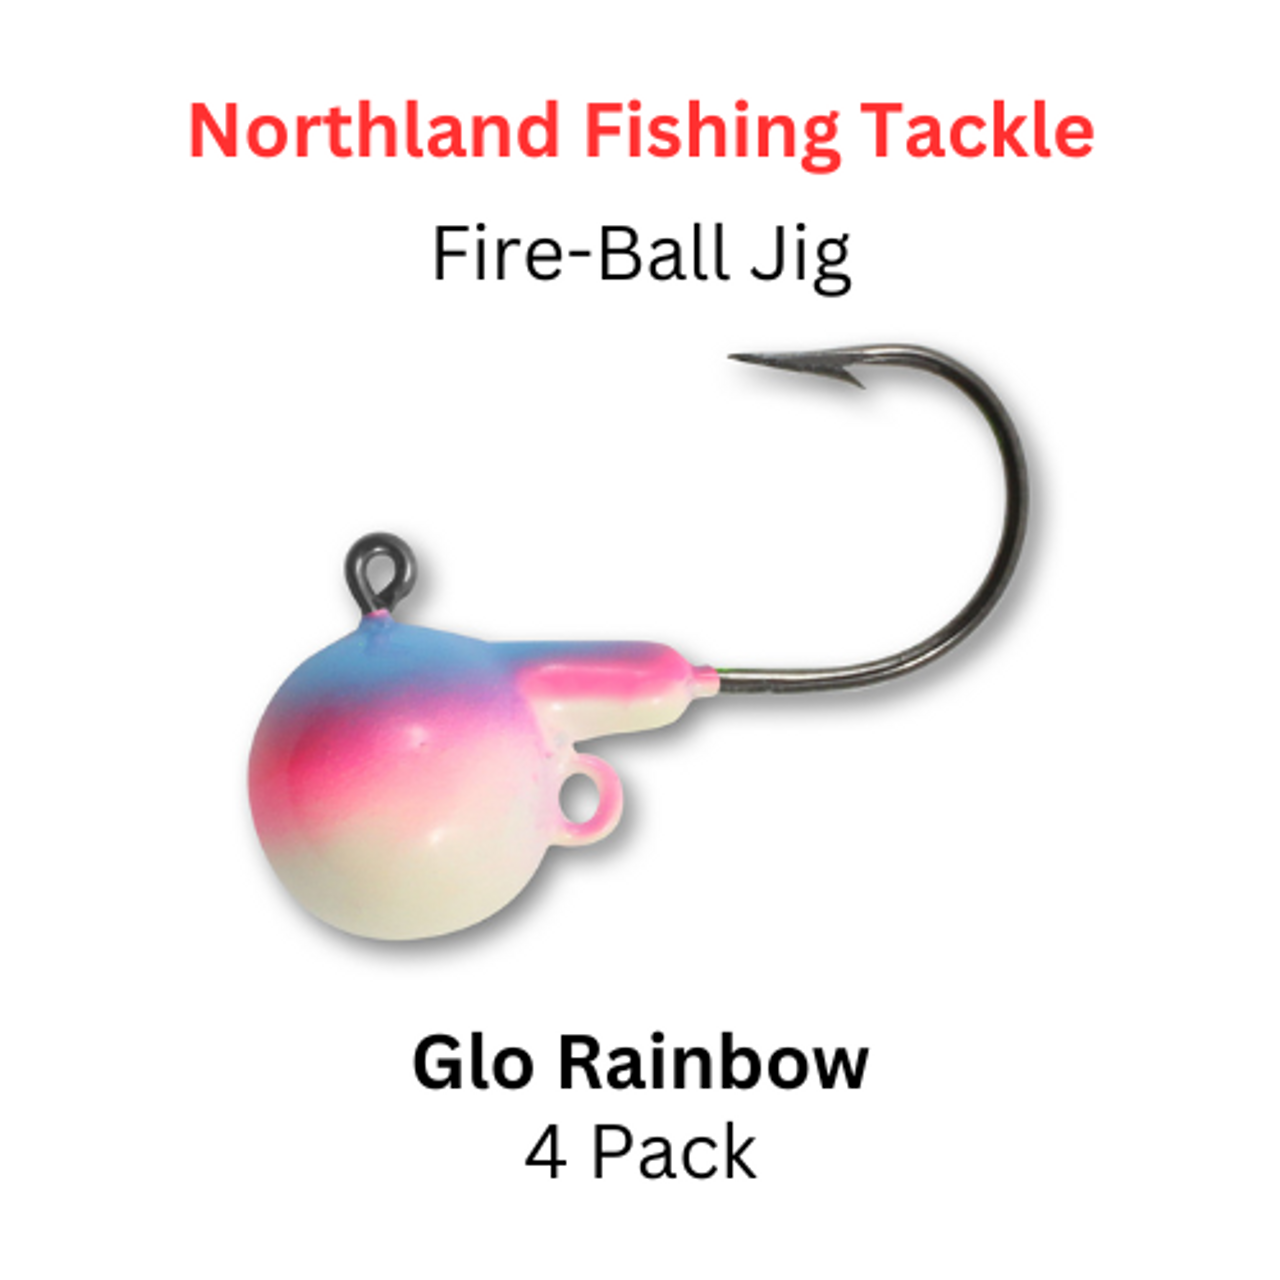 https://cdn11.bigcommerce.com/s-u9nbd/images/stencil/1280x1280/products/6161/15573/Northland_Fishing_Tackle_Fire-ball_jig_Glo_Rainbow__05243.1676731348.png?c=2?imbypass=on